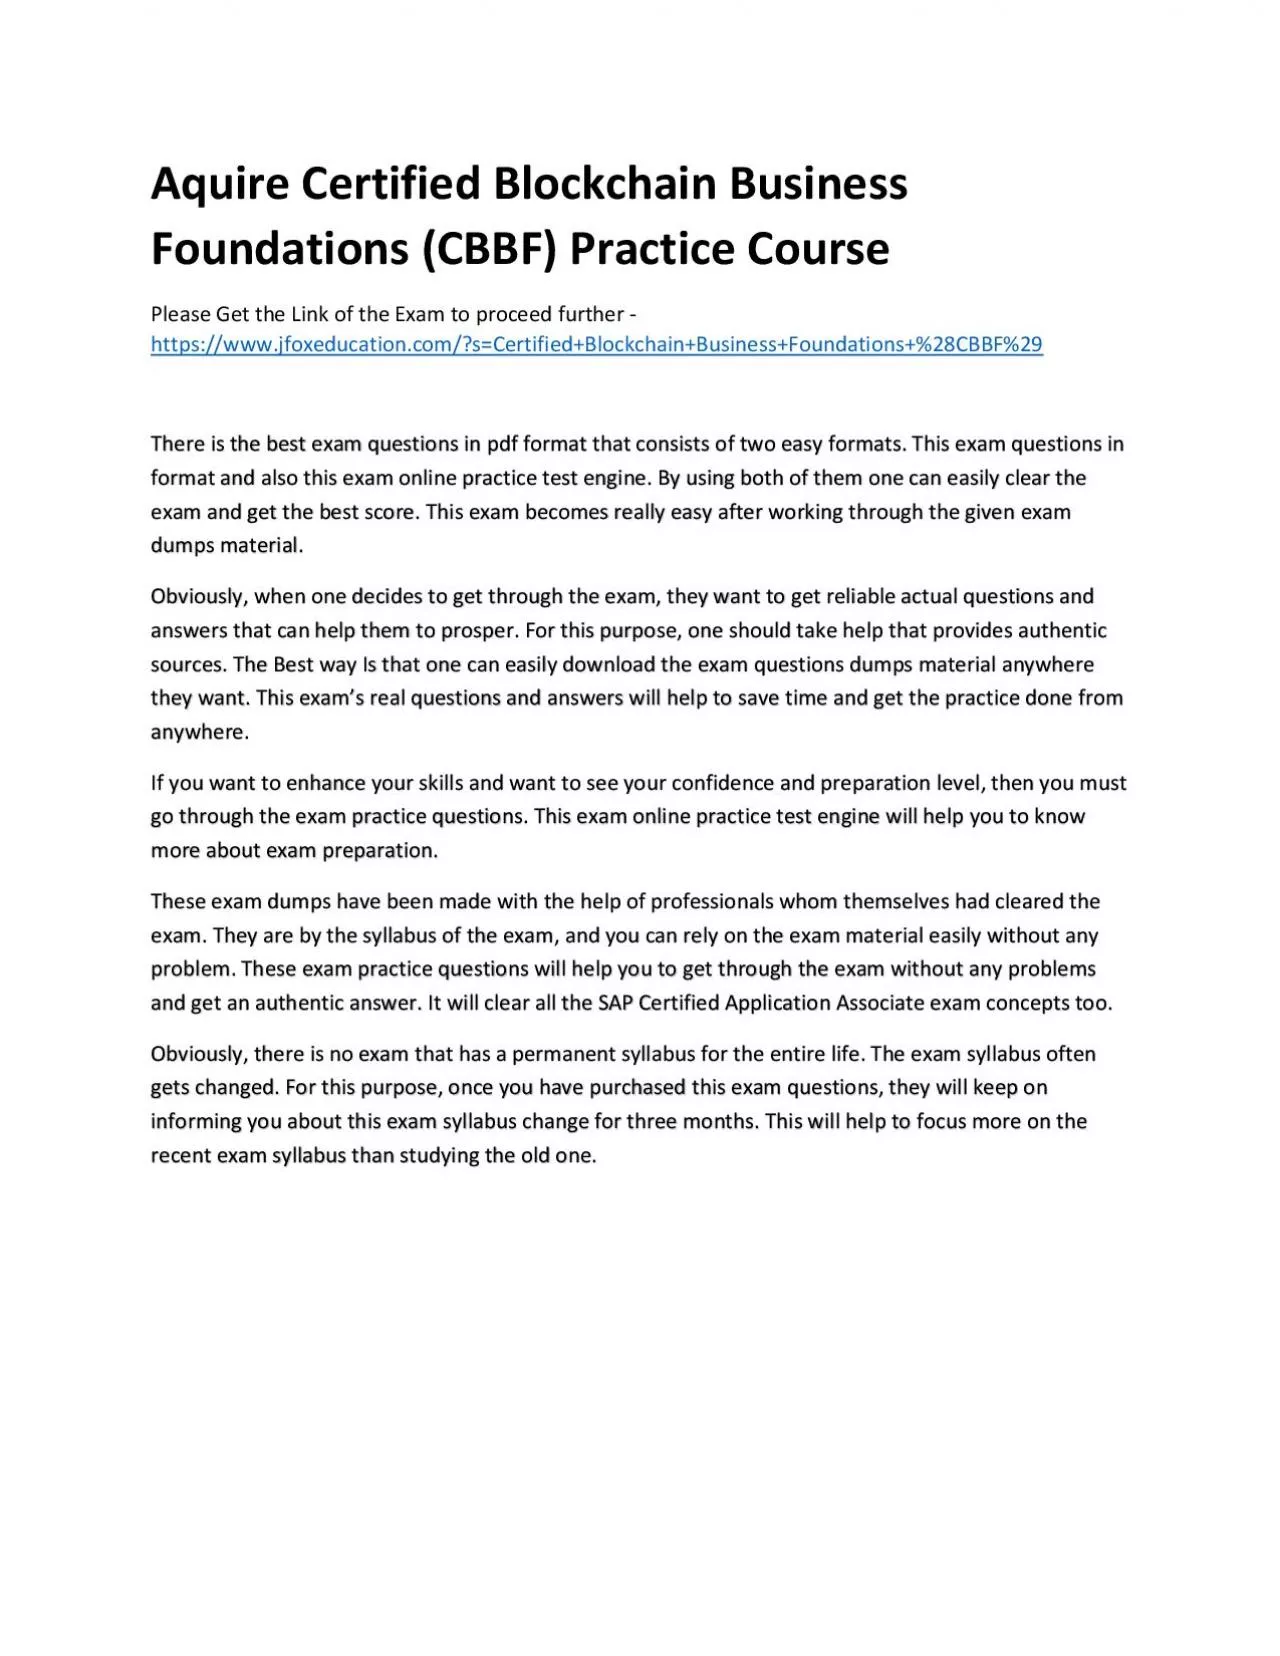 Aquire Certified Blockchain Business Foundations (CBBF) Practice Course